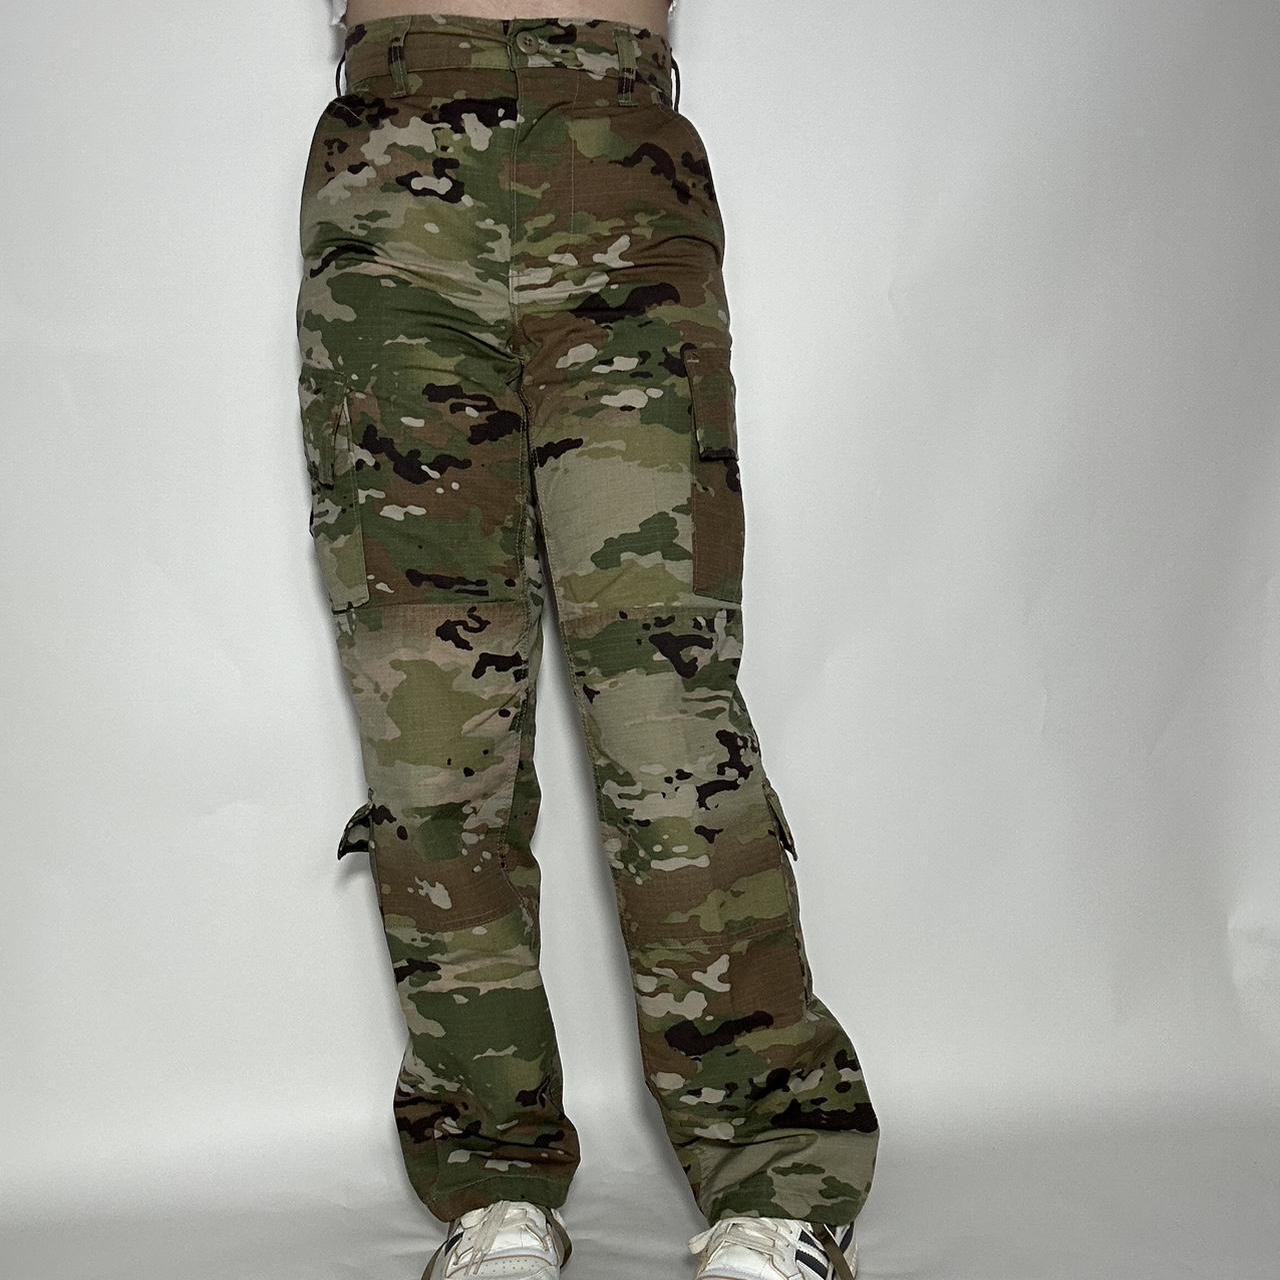 Vintage 90s high waisted unisex army camo cargo trousers